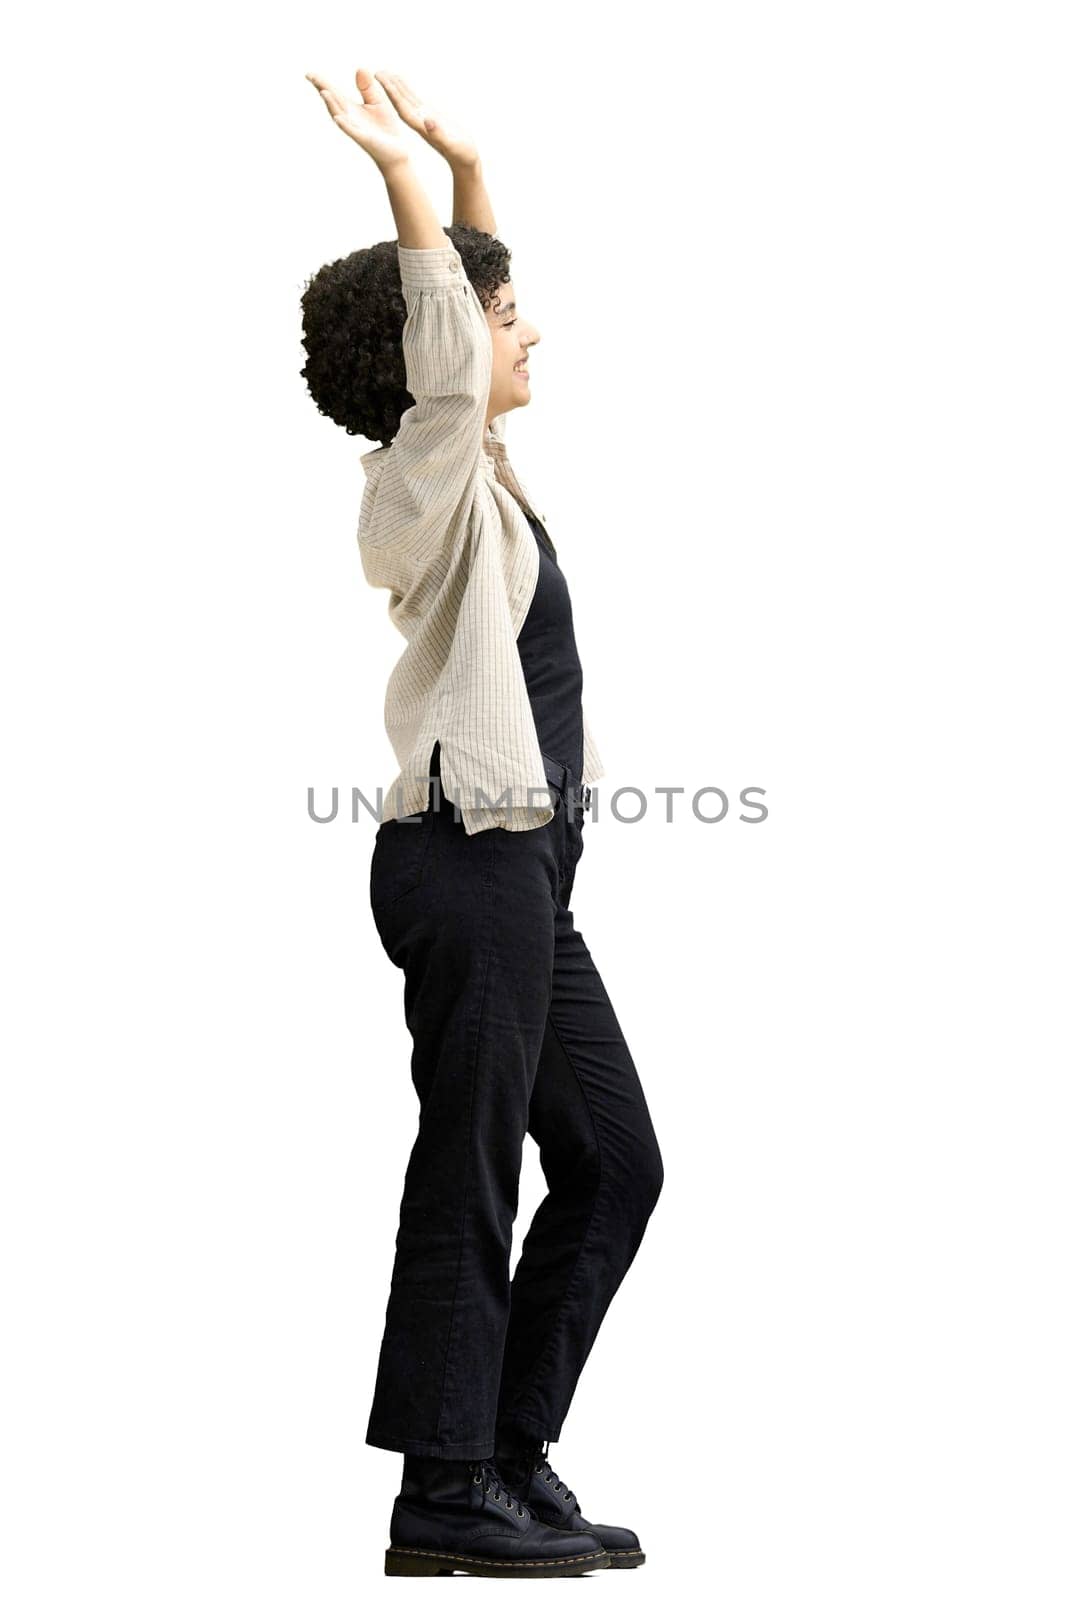 A woman, full-length, on a white background, waving her arms by Prosto